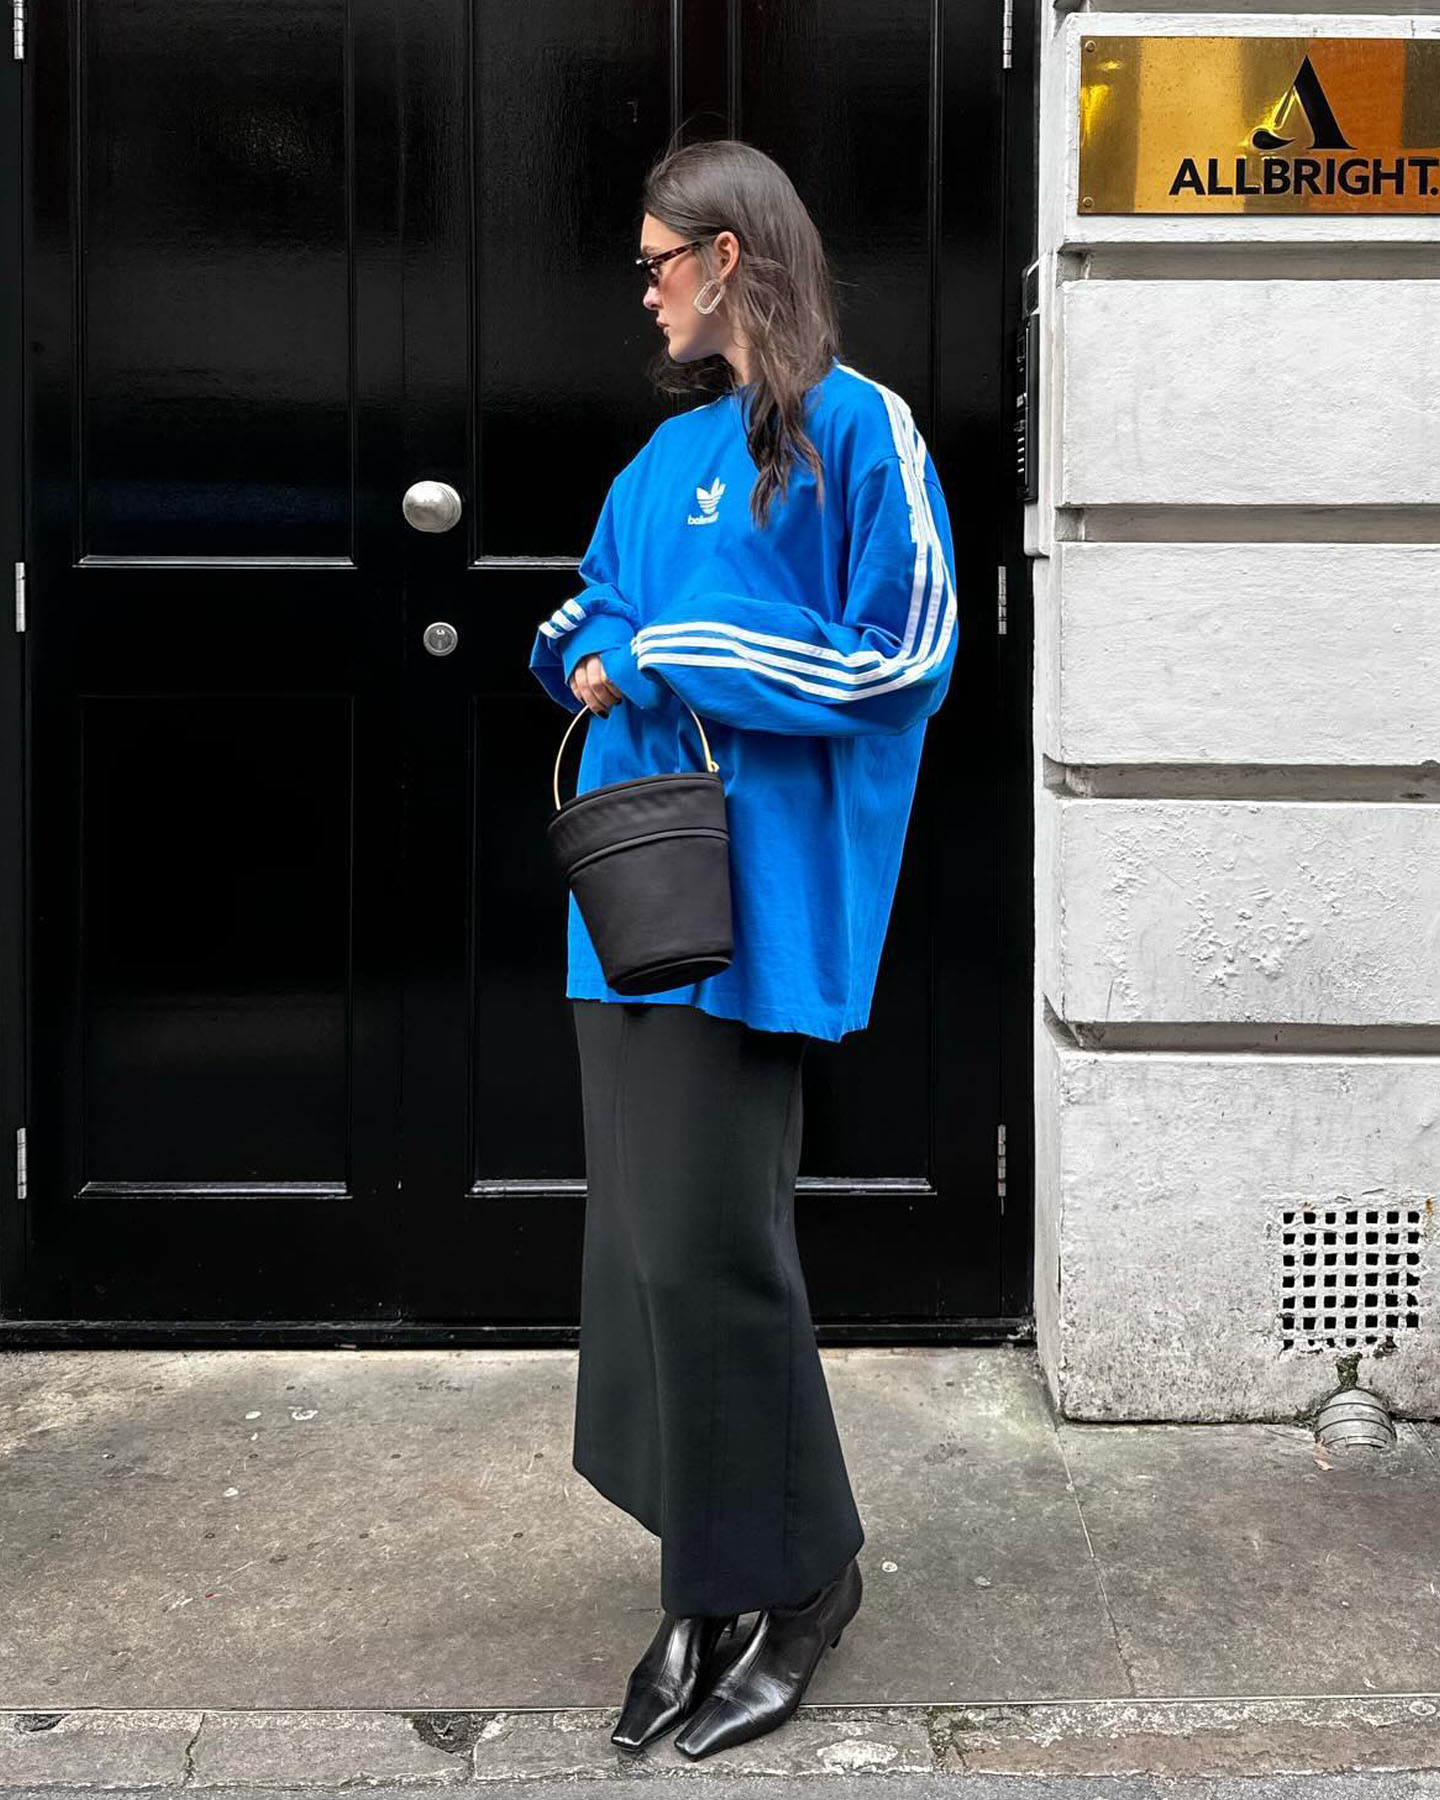 fashion influencer poses on the sidewalk in London wearing a bright blue Adidas long sleeved top with a black bucket bag, a black maxi skirt, and square-toed boots